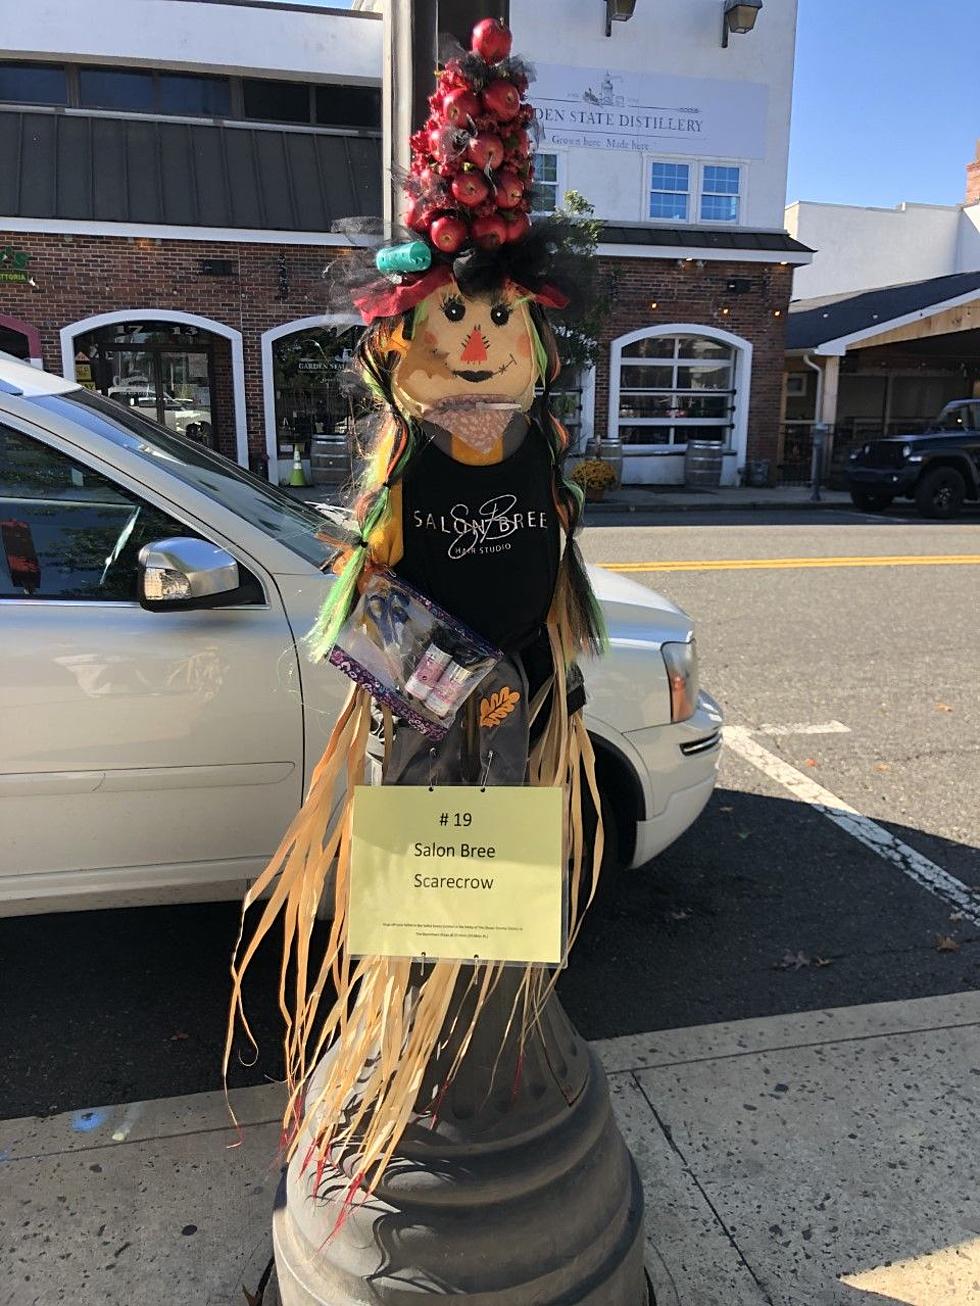 Here They Are! The Incredibly Creative Scarecrows in Downtown Toms River, NJ[Photo Gallery]